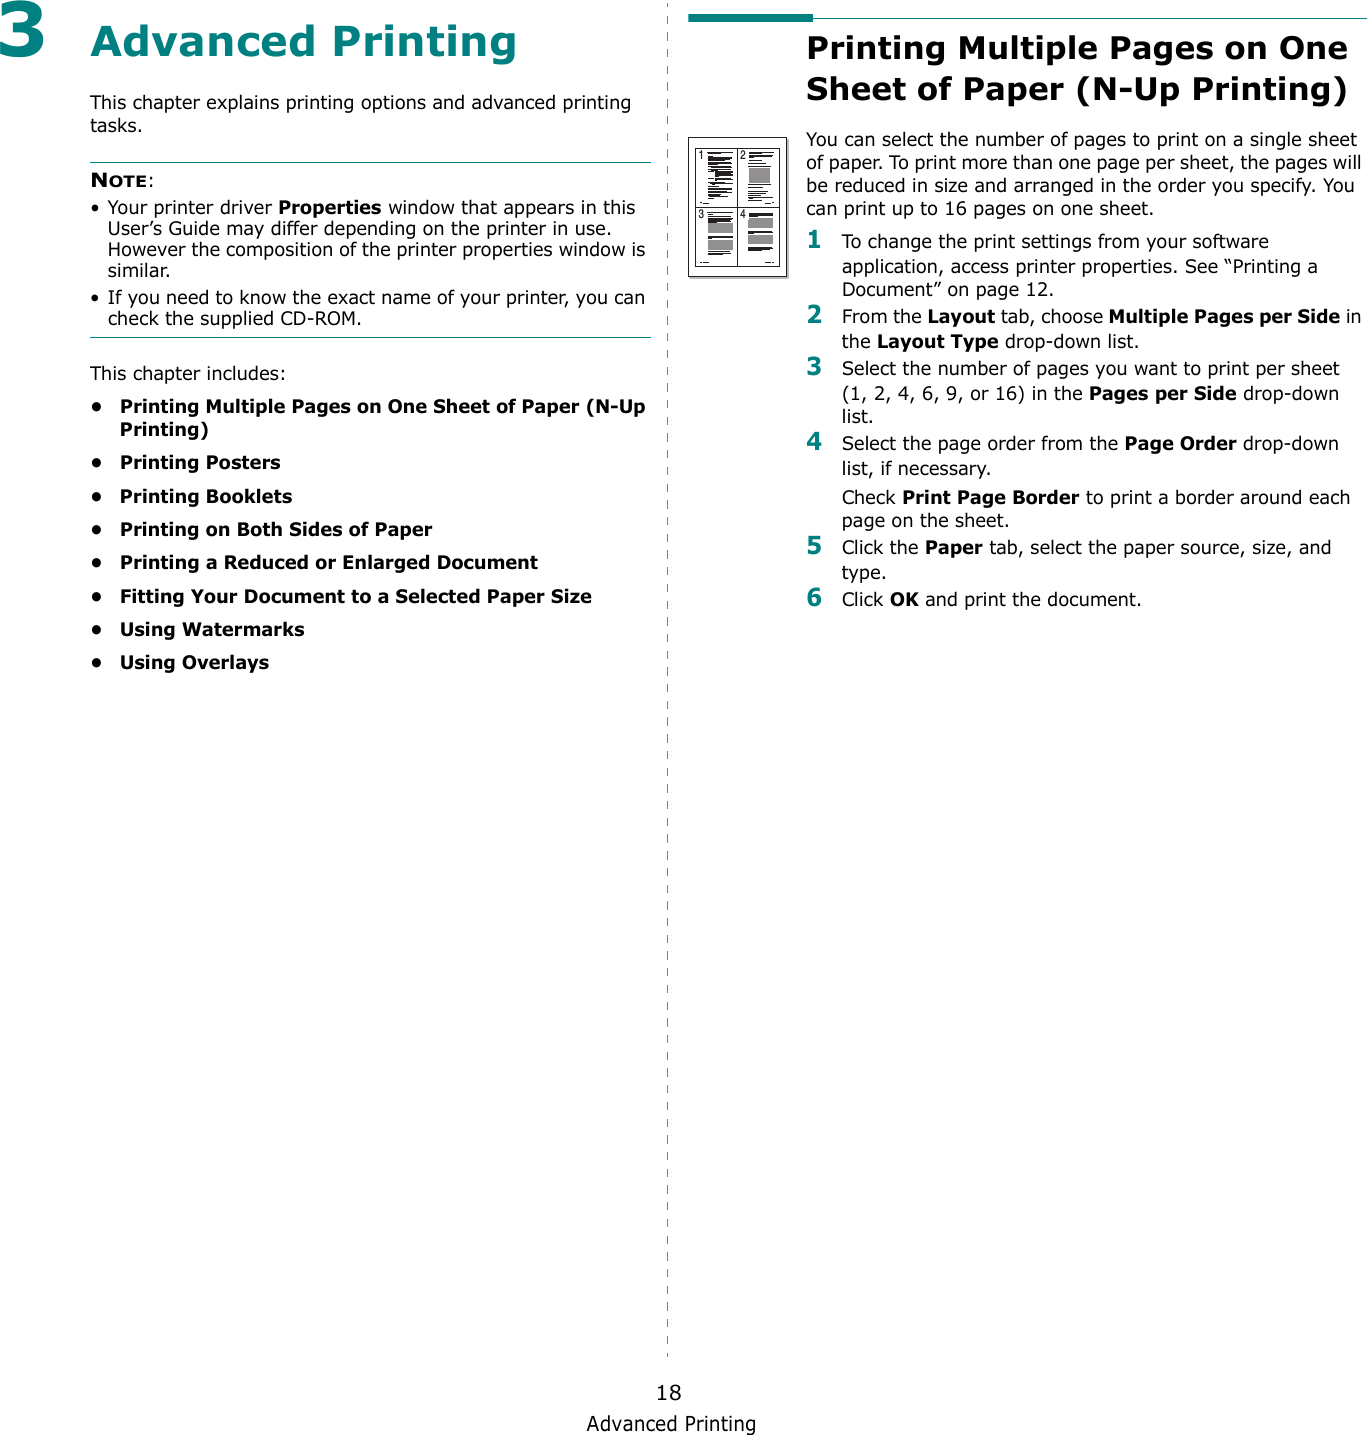 Advanced Printing183Advanced PrintingThis chapter explains printing options and advanced printing tasks. NOTE: • Your printer driver Properties window that appears in this User’s Guide may differ depending on the printer in use. However the composition of the printer properties window is similar.• If you need to know the exact name of your printer, you can check the supplied CD-ROM.This chapter includes:• Printing Multiple Pages on One Sheet of Paper (N-Up Printing)•Printing Posters• Printing Booklets• Printing on Both Sides of Paper• Printing a Reduced or Enlarged Document• Fitting Your Document to a Selected Paper Size•Using Watermarks•Using OverlaysPrinting Multiple Pages on One Sheet of Paper (N-Up Printing) You can select the number of pages to print on a single sheet of paper. To print more than one page per sheet, the pages will be reduced in size and arranged in the order you specify. You can print up to 16 pages on one sheet.  1To change the print settings from your software application, access printer properties. See “Printing a Document” on page 12.2From the Layout tab, choose Multiple Pages per Side in the Layout Type drop-down list. 3Select the number of pages you want to print per sheet (1, 2, 4, 6, 9, or 16) in the Pages per Side drop-down list.4Select the page order from the Page Order drop-down list, if necessary. Check Print Page Border to print a border around each page on the sheet. 5Click the Paper tab, select the paper source, size, and type.6Click OK and print the document. 1 23 4